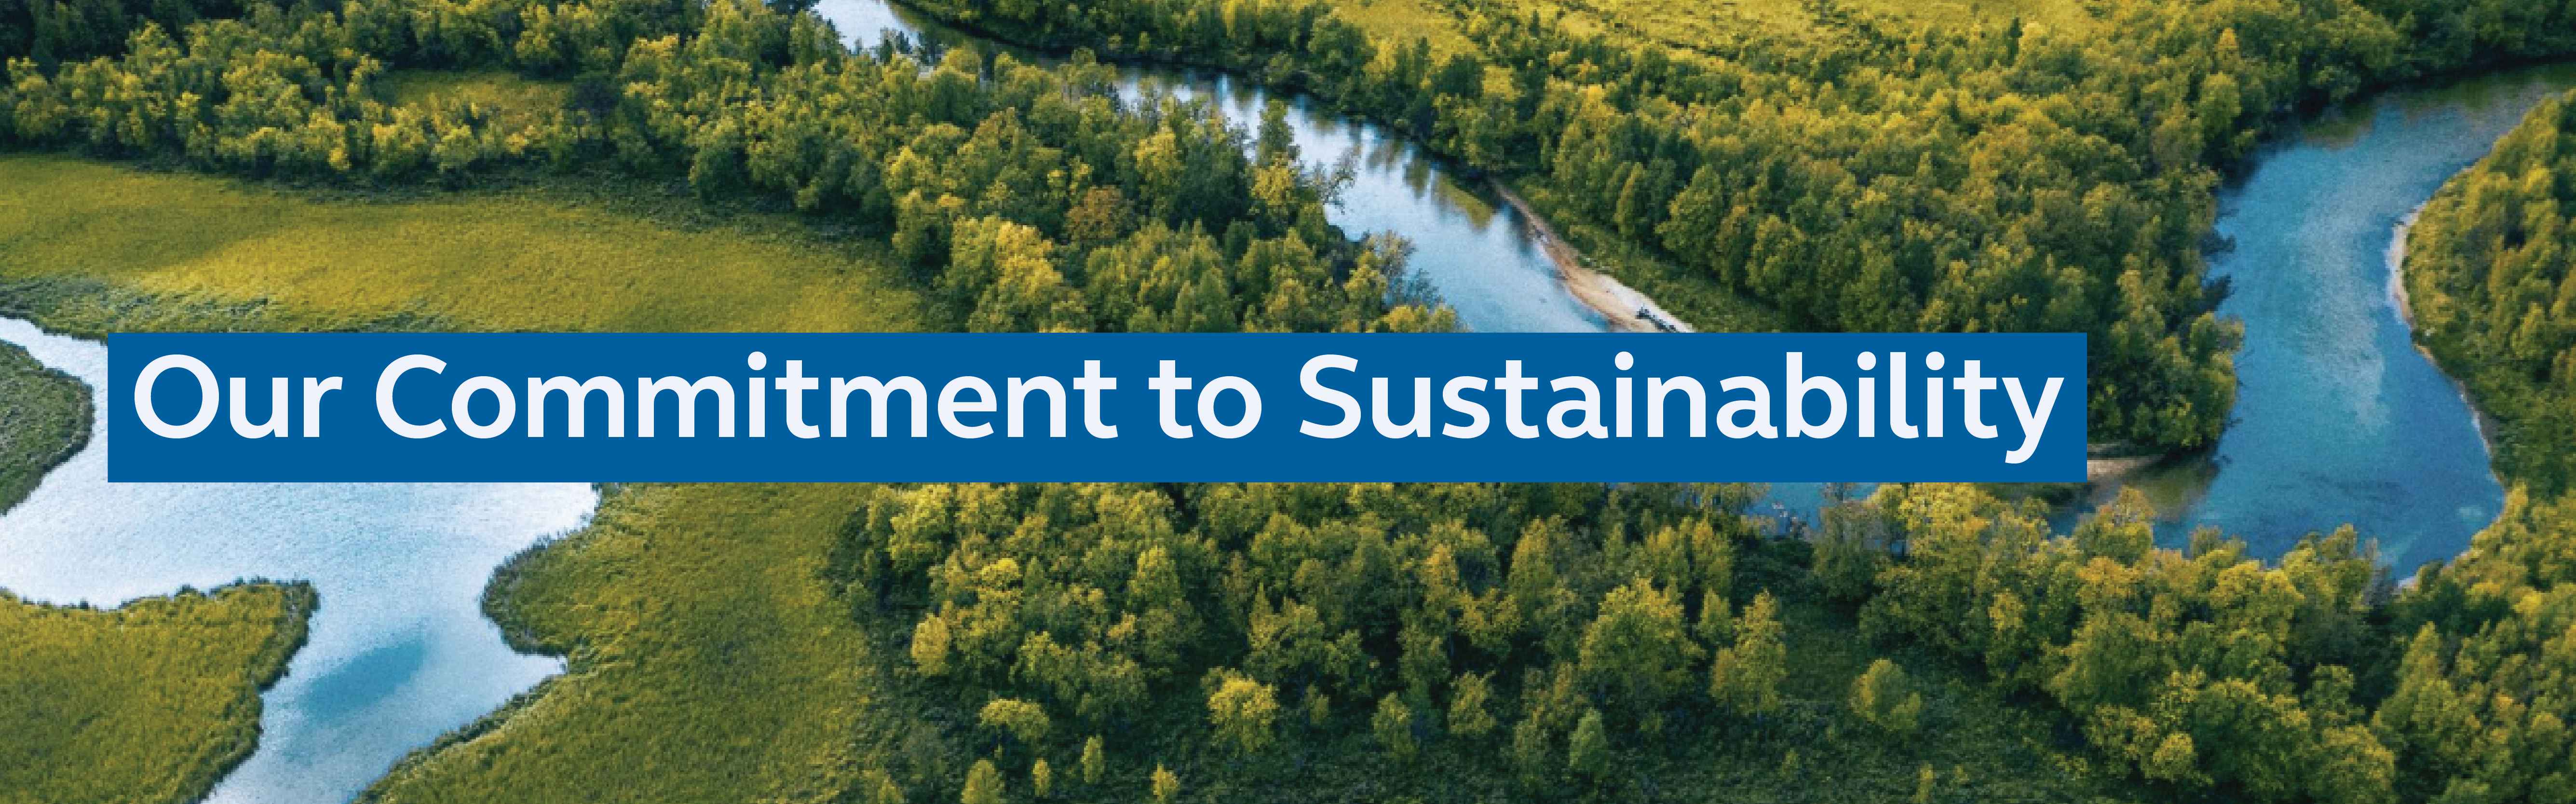 Our Commitment to Sustainability 